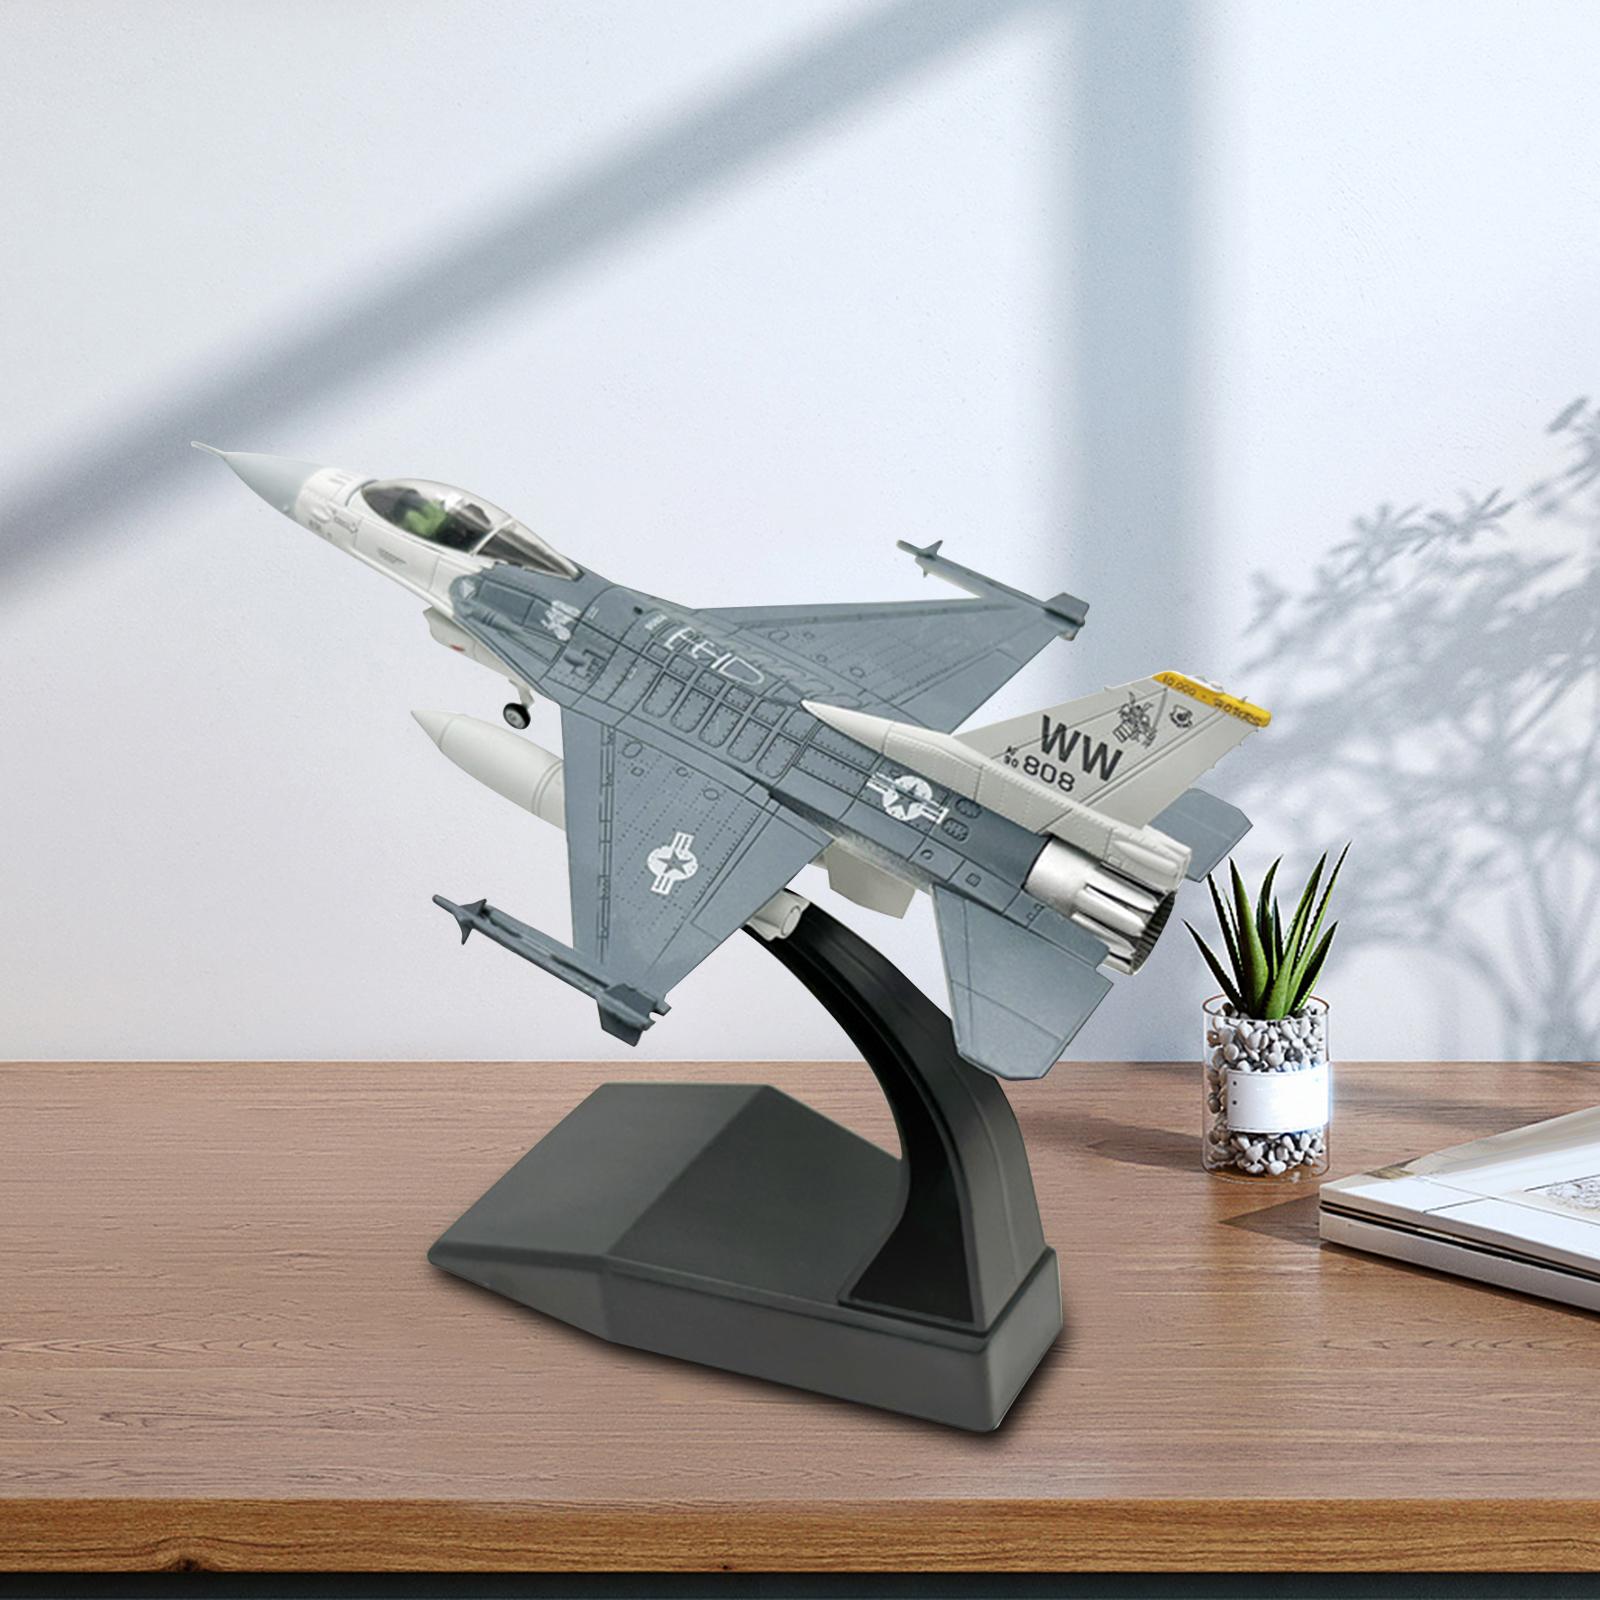 1/100 Scale F16C Fighter Simulation Ks Toys Diecast Alloy Model Aircraft Ornament Airplane for Bar Cafe Office Bookshelf Home